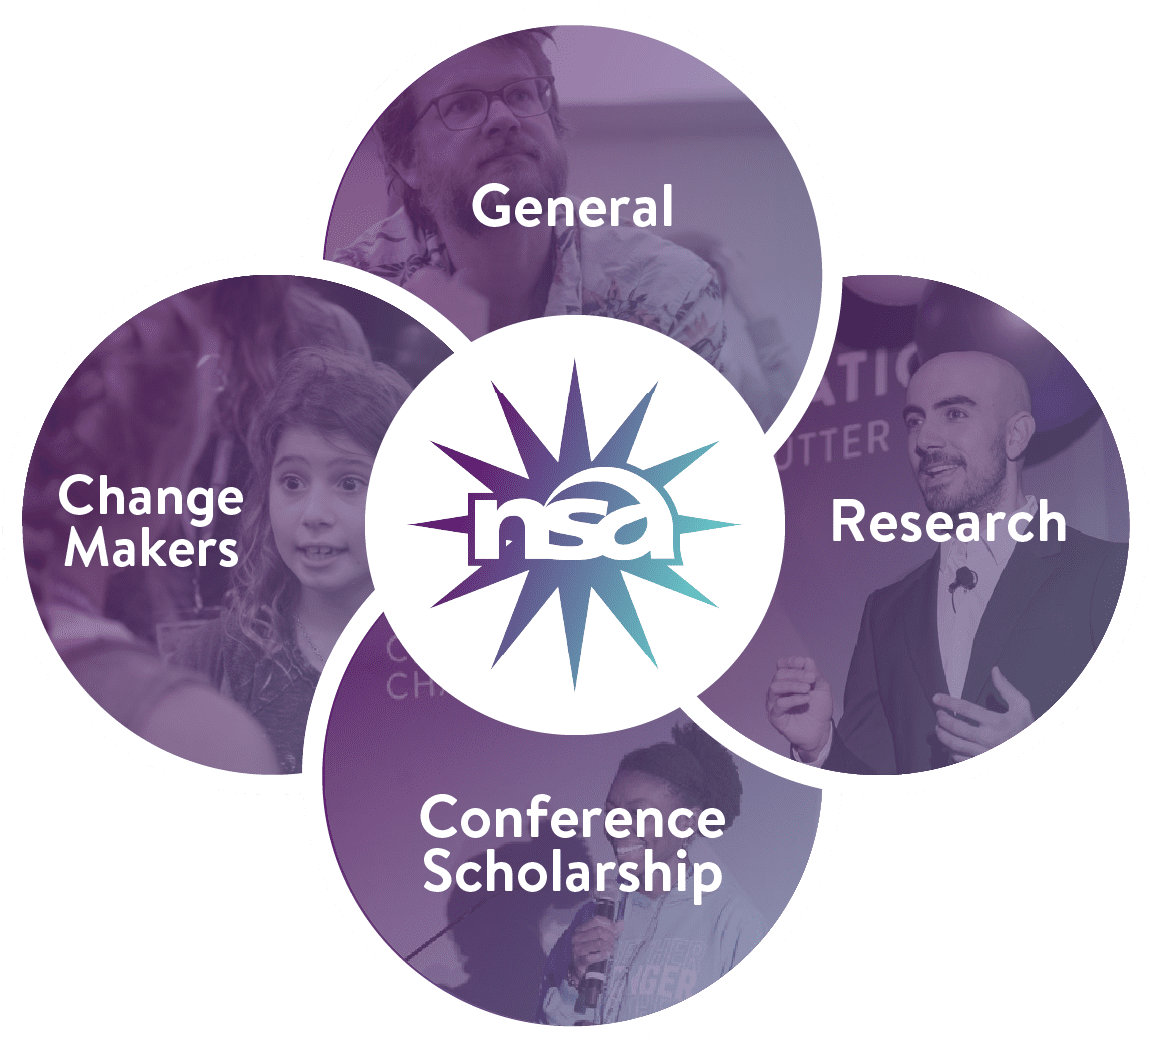 A circular diagram with four segments labeled "General," "Change Makers," "Research," and "Conference Scholarship" surrounds a central logo that reads "NSA." Each segment features a related image of a person, emphasizing the community's dedication to understanding and supporting stuttering.